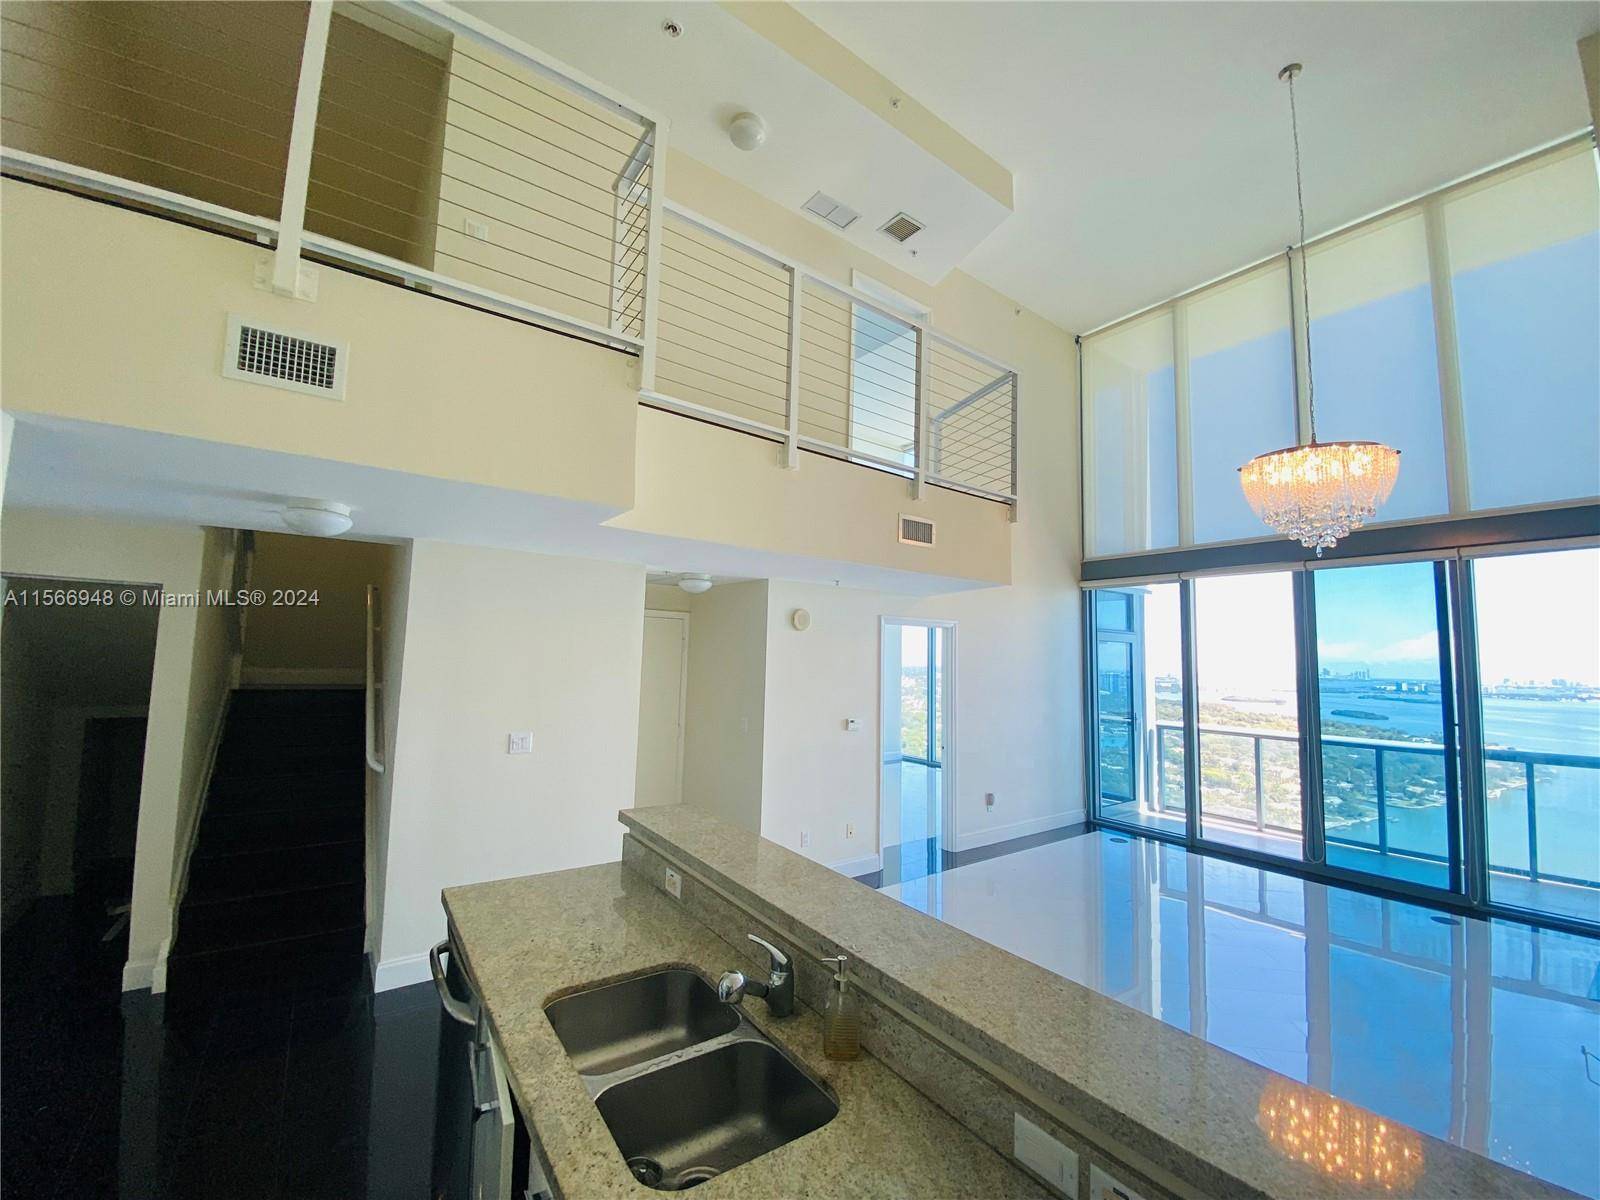 LOCATION LUXURY ! Breathtaking two story Penthouse showcasing unparalleled waterfront views.